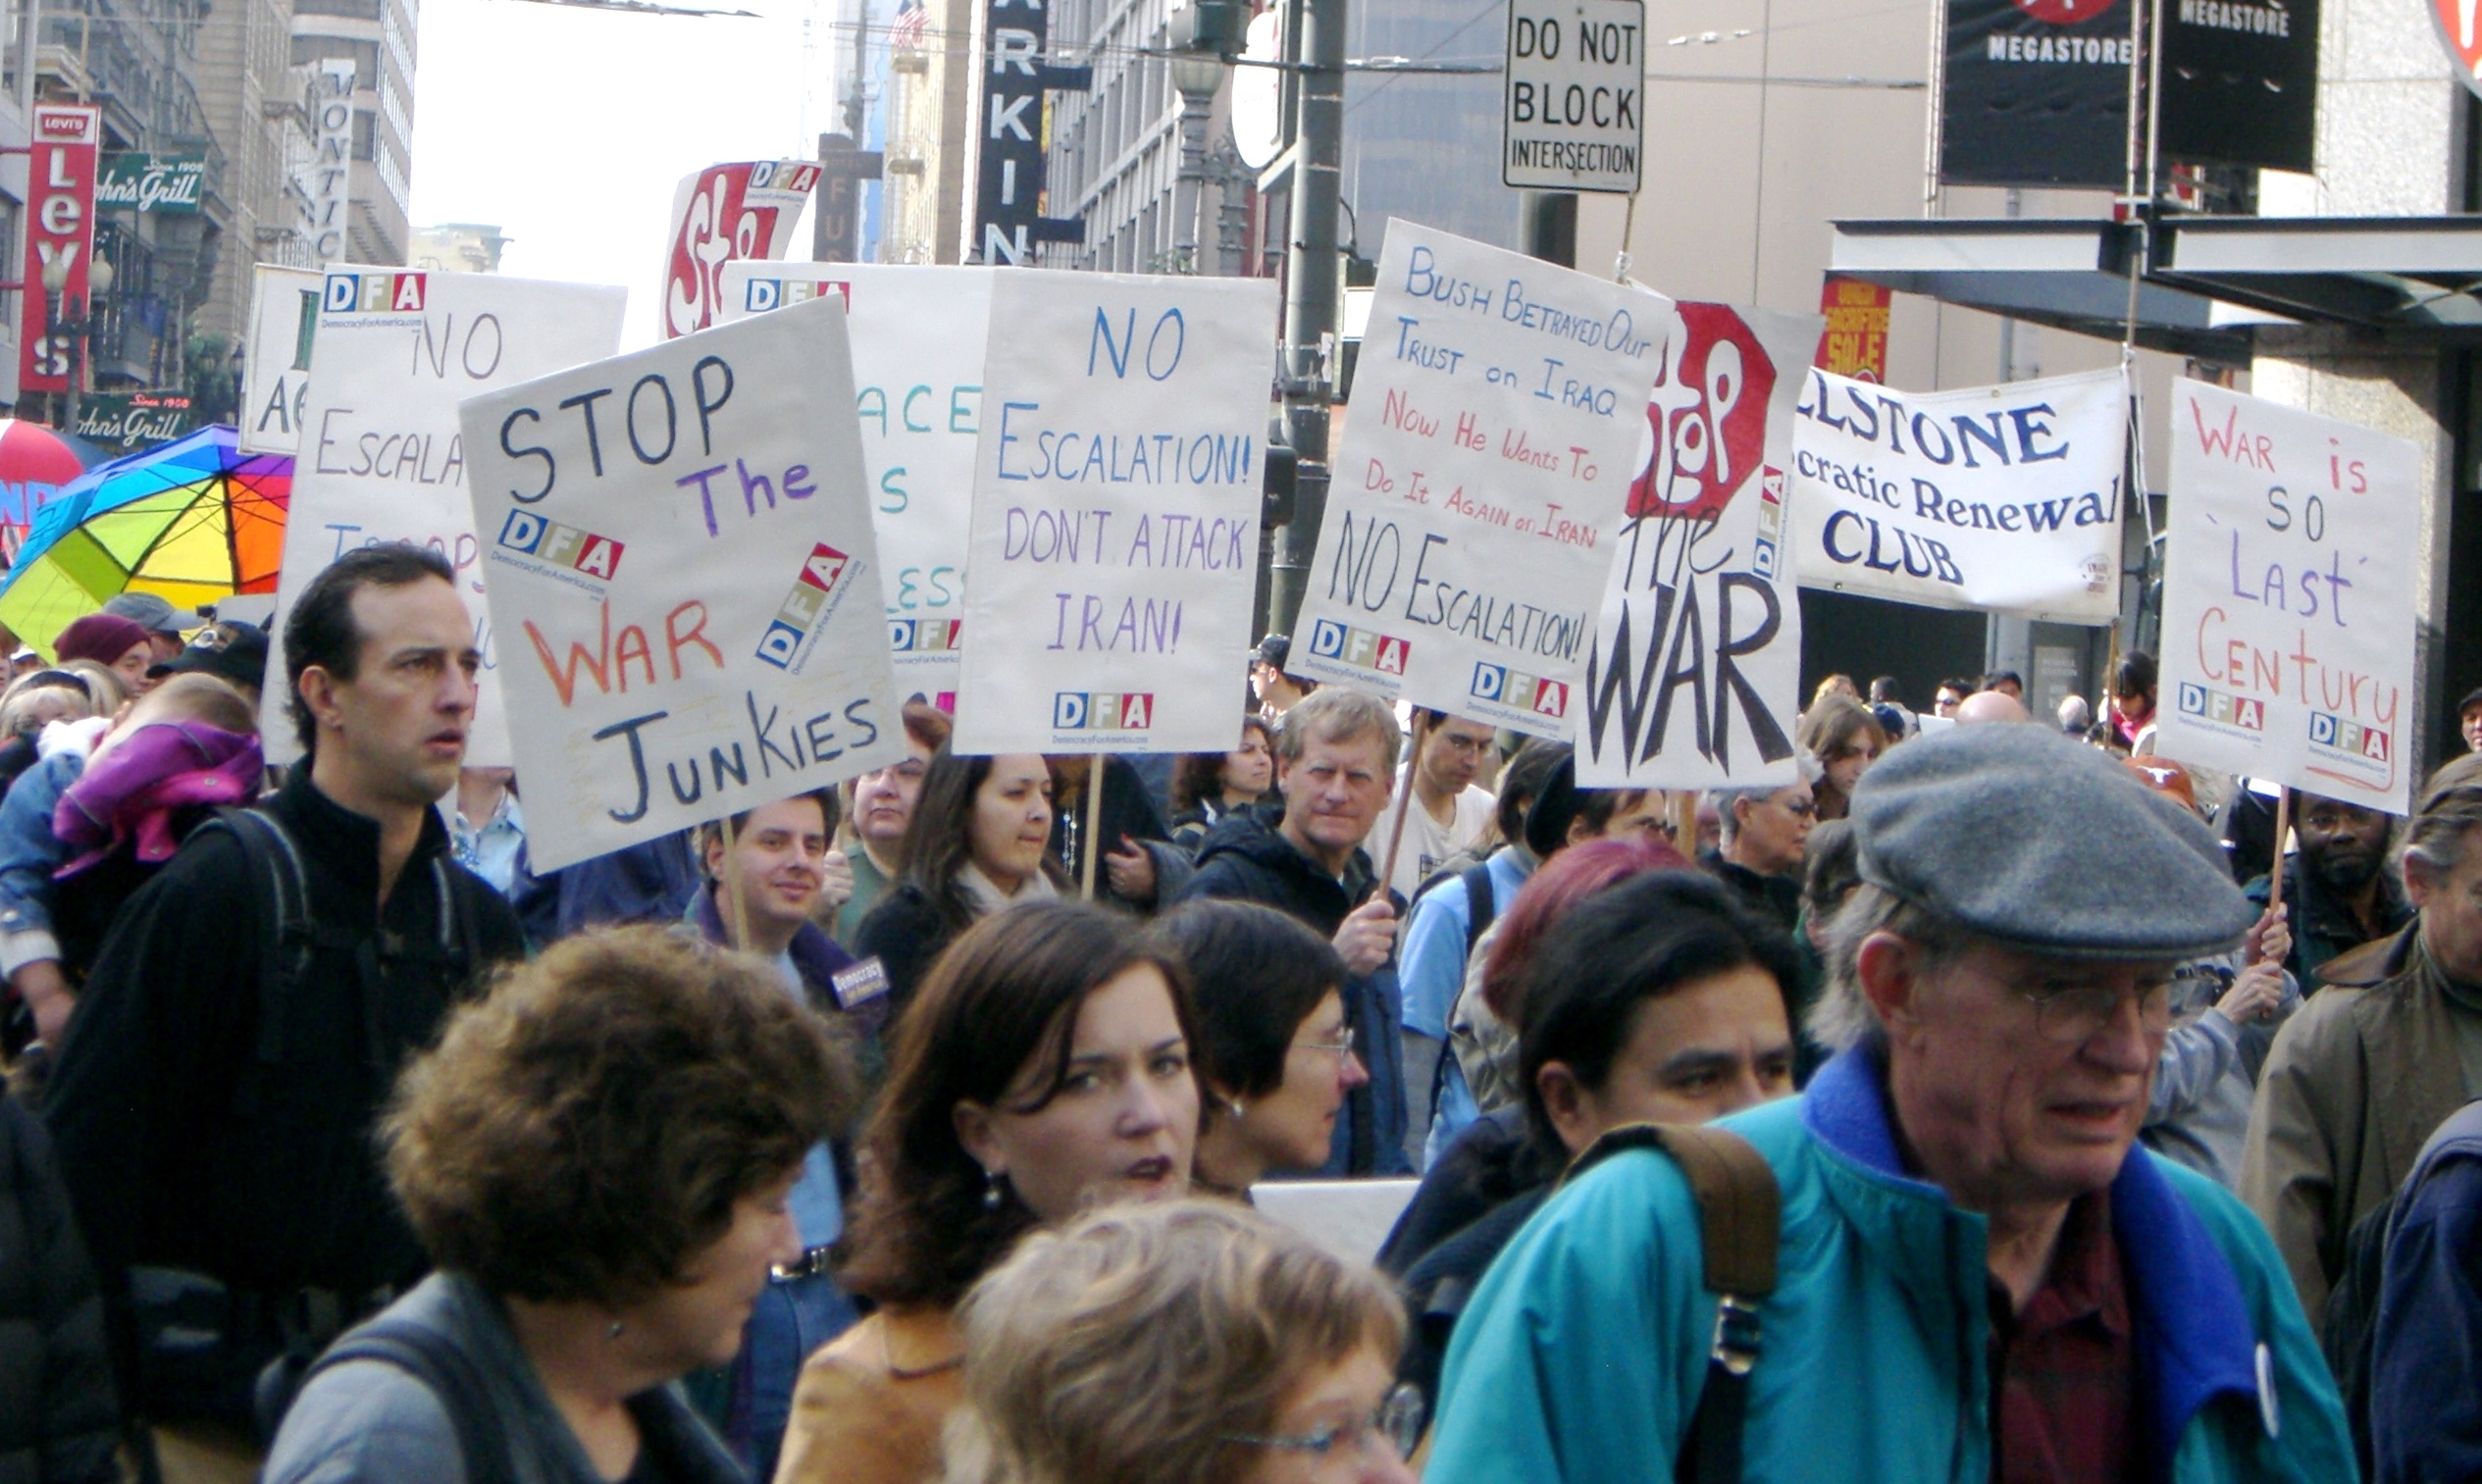 Marching all night, screaming 'til hoarse: protesting the Iraq Invasion 20 years ago